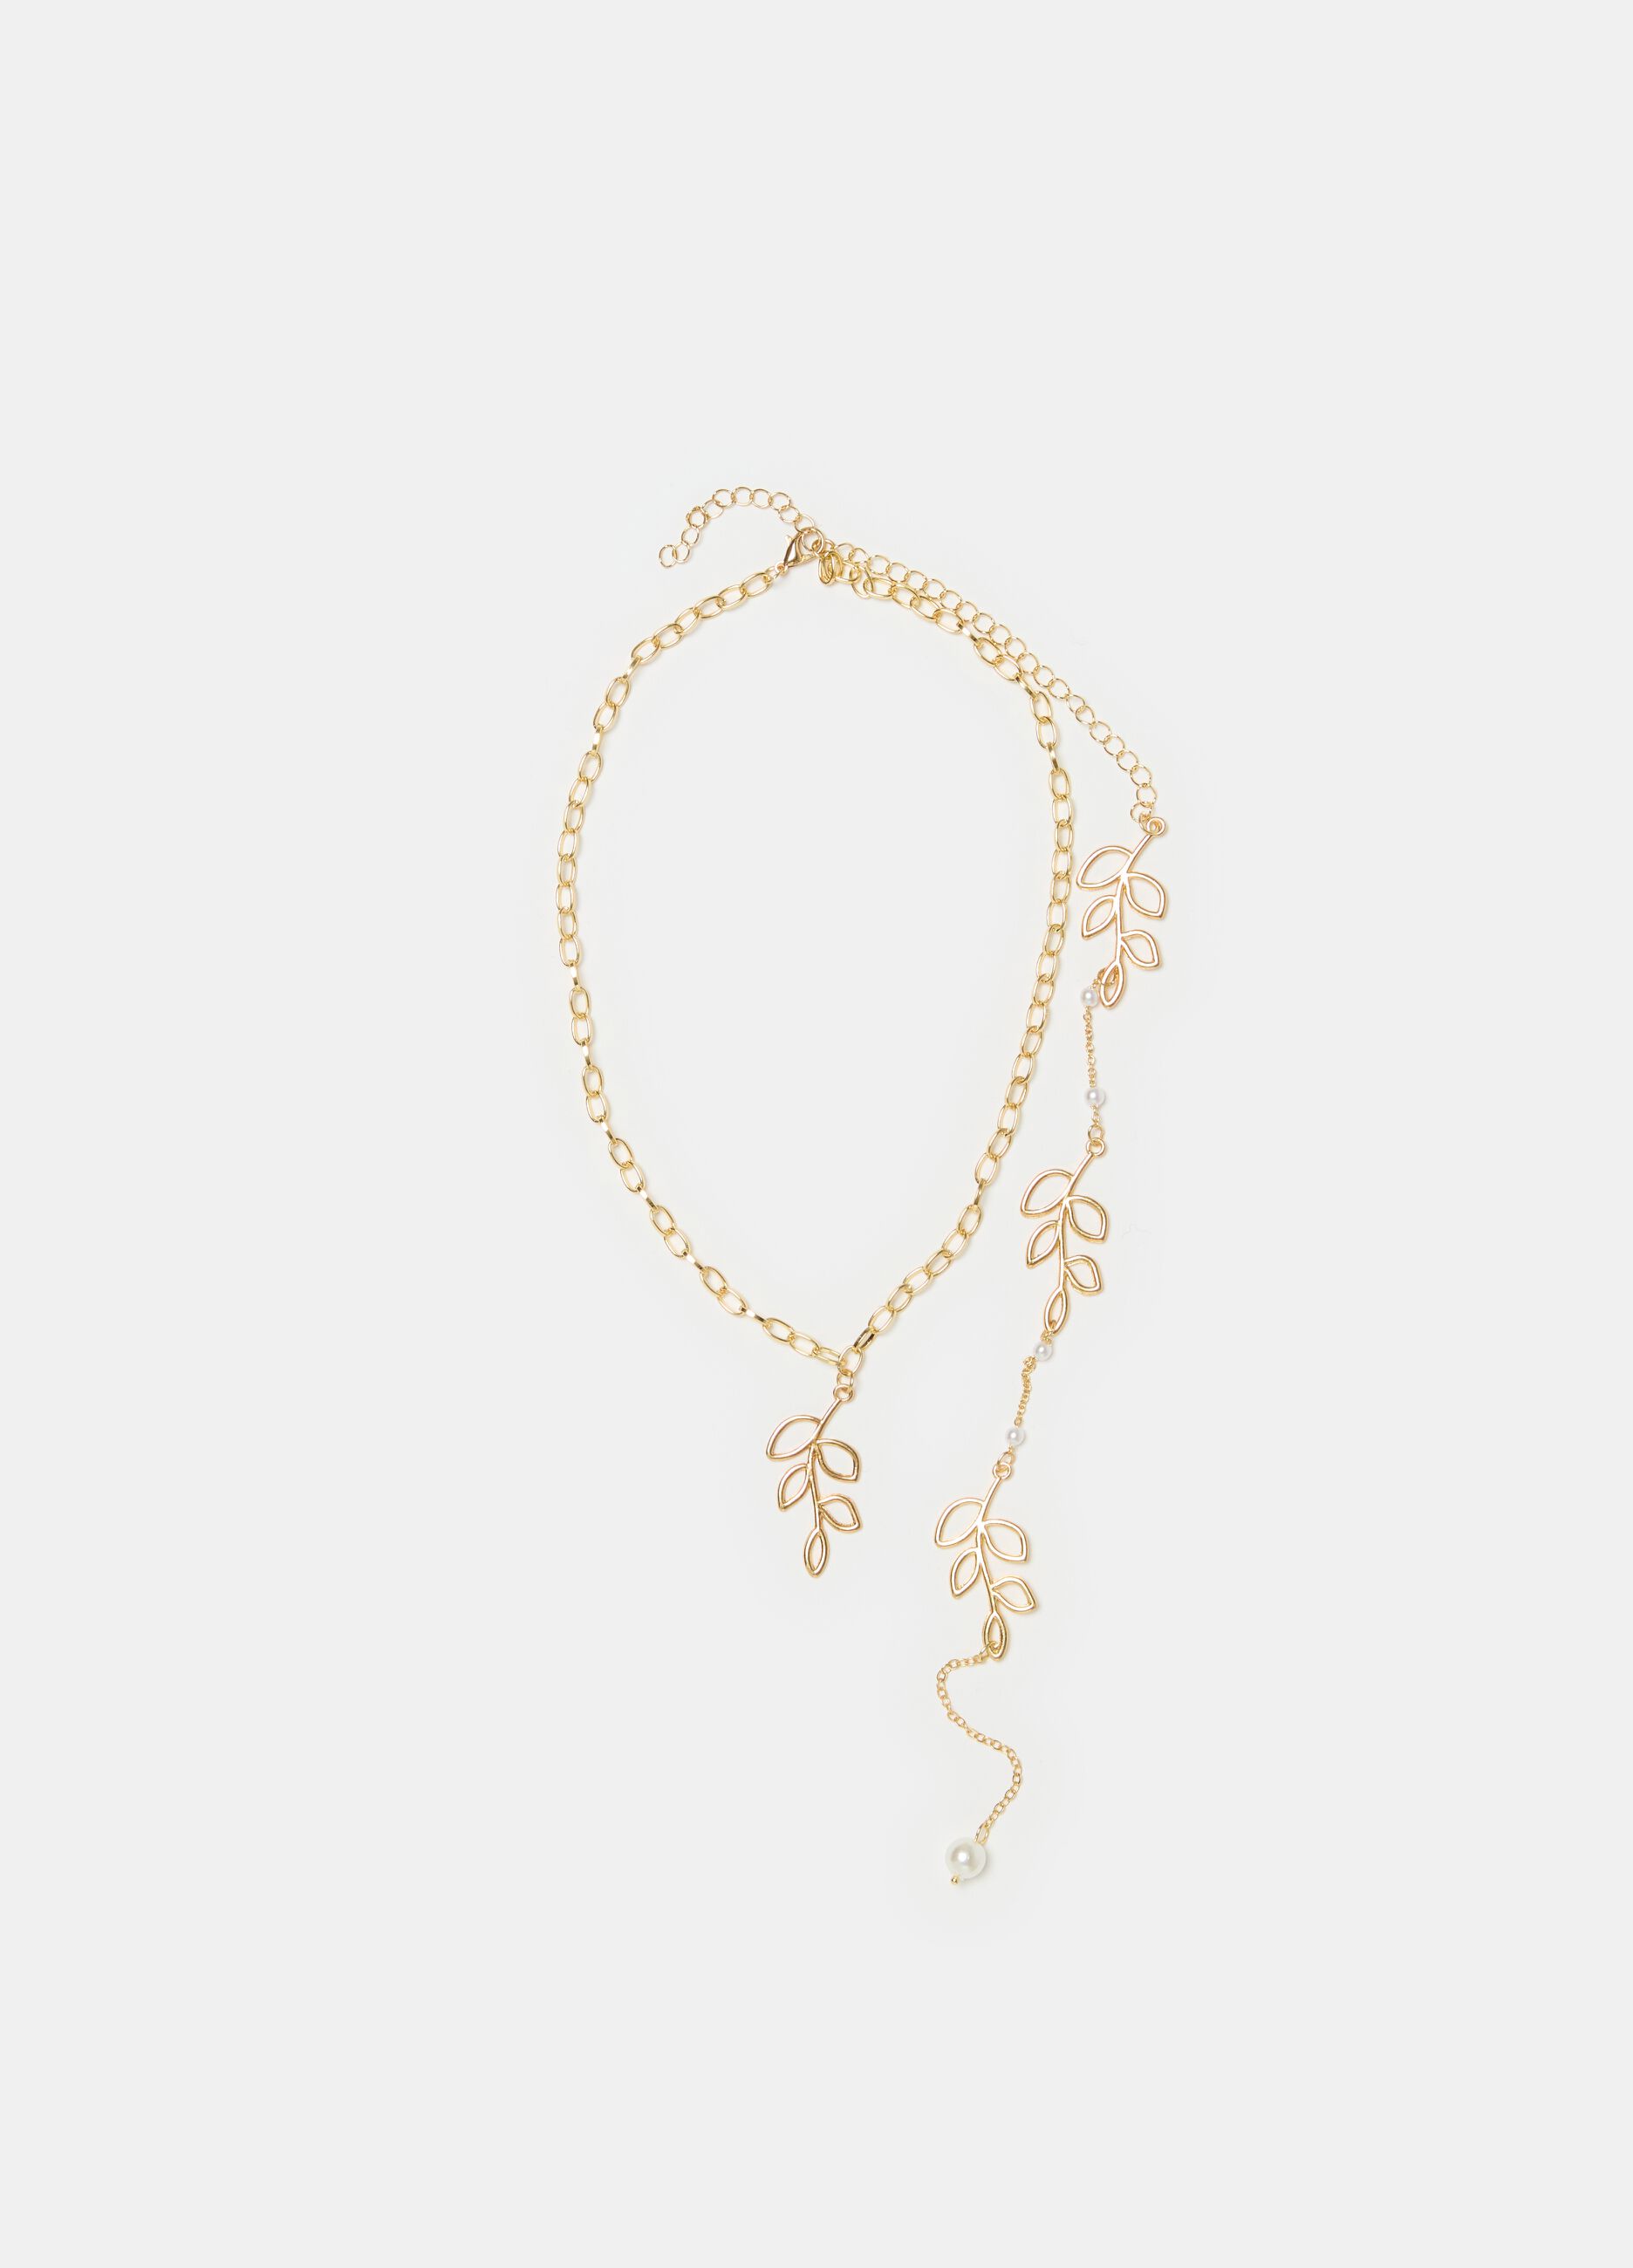 Chain necklace with leaves and pearls